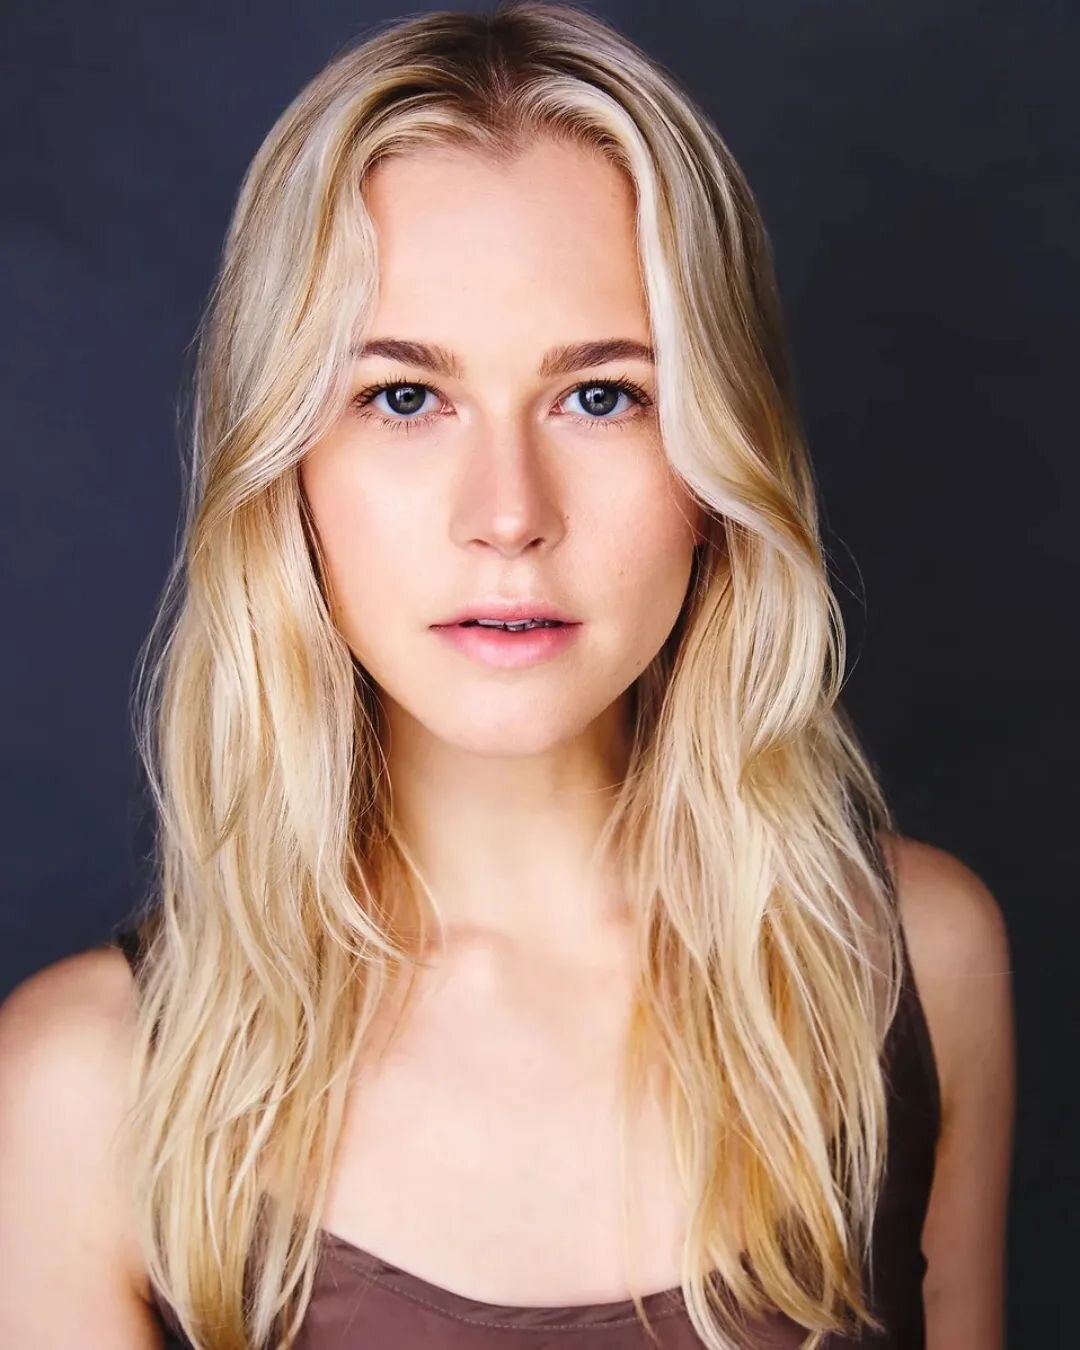 Name: Sini Mattila
Playing age: 18-27

Sini Mattila is a Finnish Meisner-trained actress based in Los Angeles. She studied theatre at the City College of New York as well as completed a two-year conservatory at the William Esper Studio. For years, sh